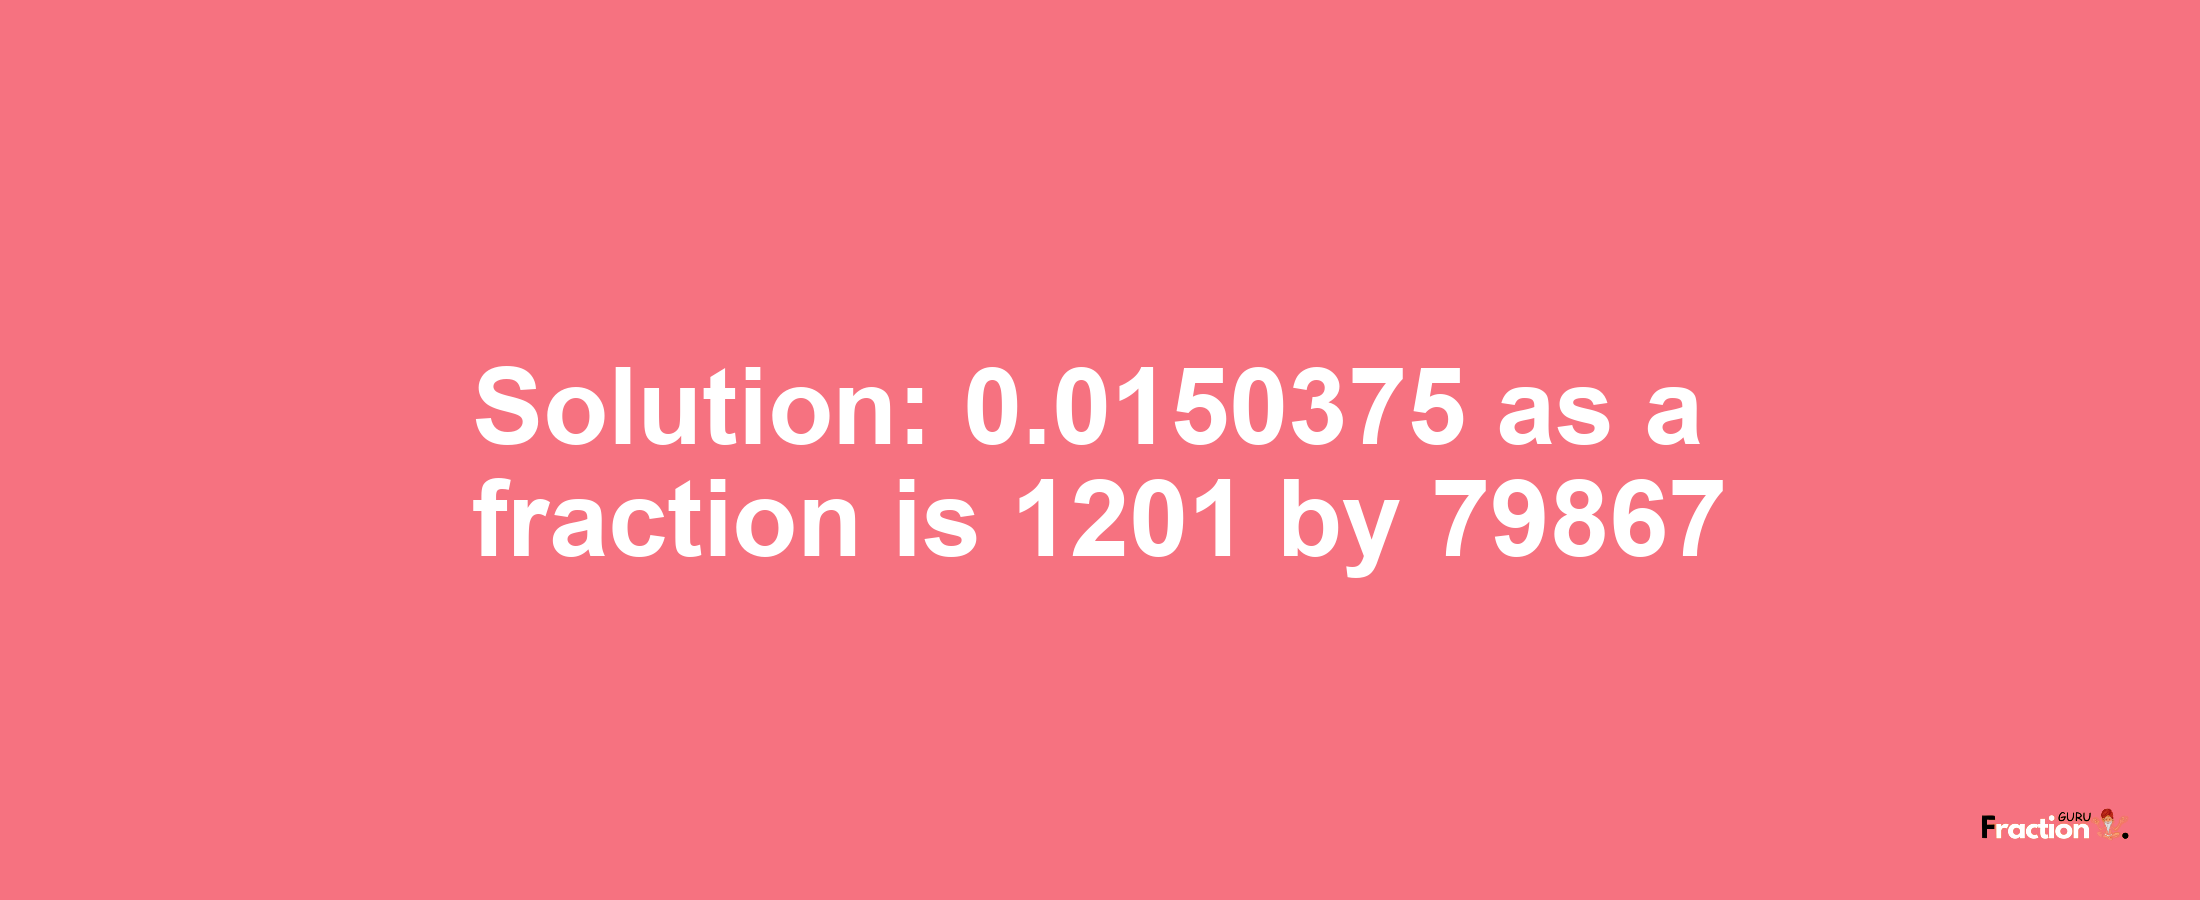 Solution:0.0150375 as a fraction is 1201/79867